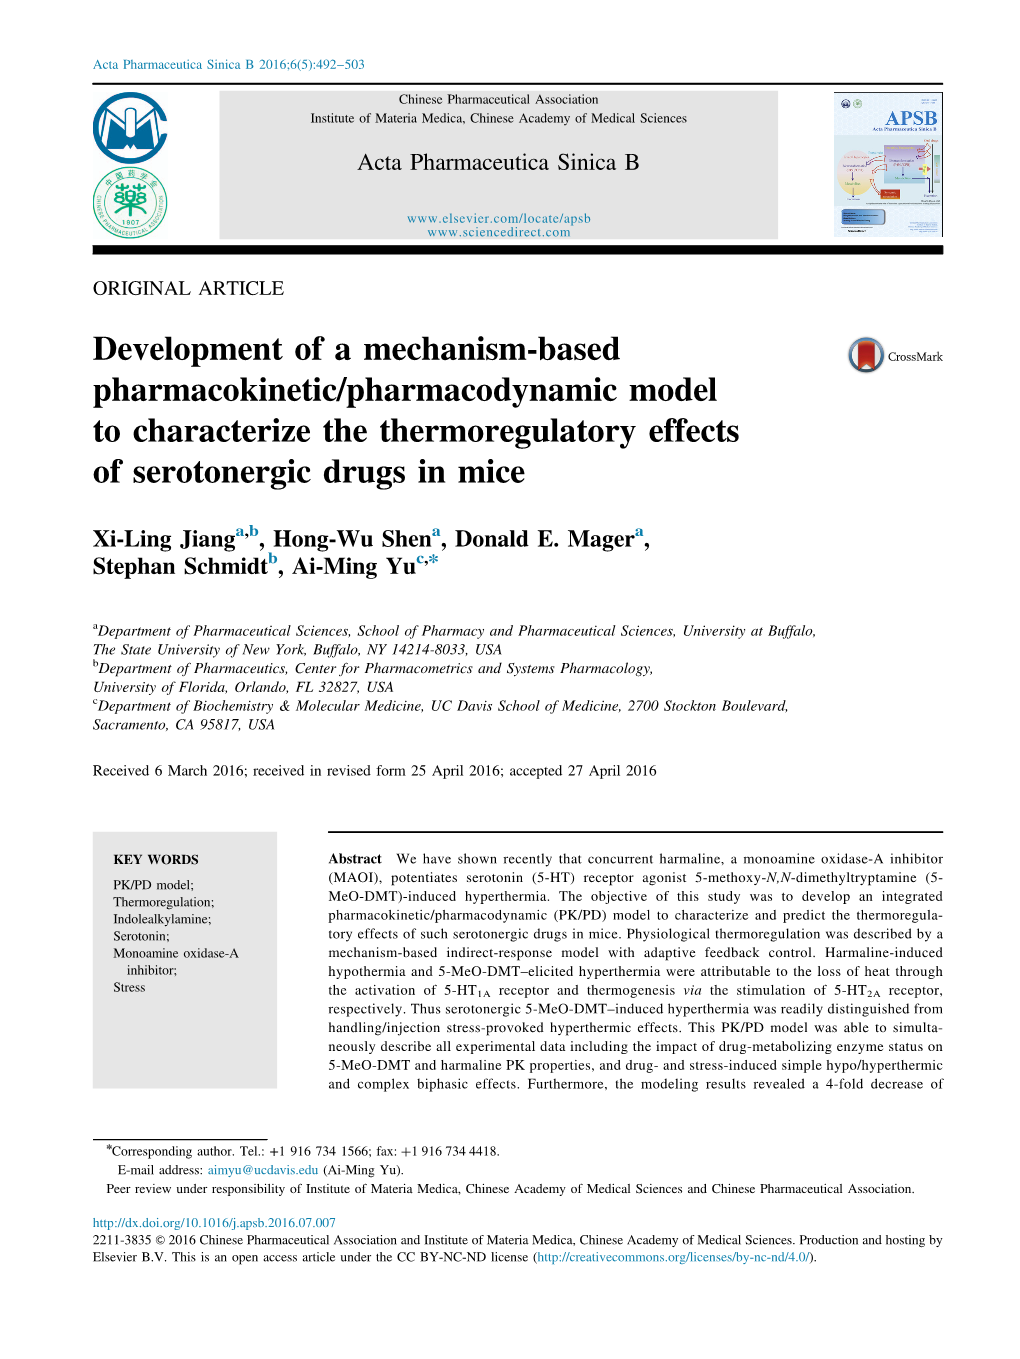 Development of a Mechanism-Based Pharmacokinetic/Pharmacodynamic Model to Characterize the Thermoregulatory Effects of Serotonergic Drugs in Mice